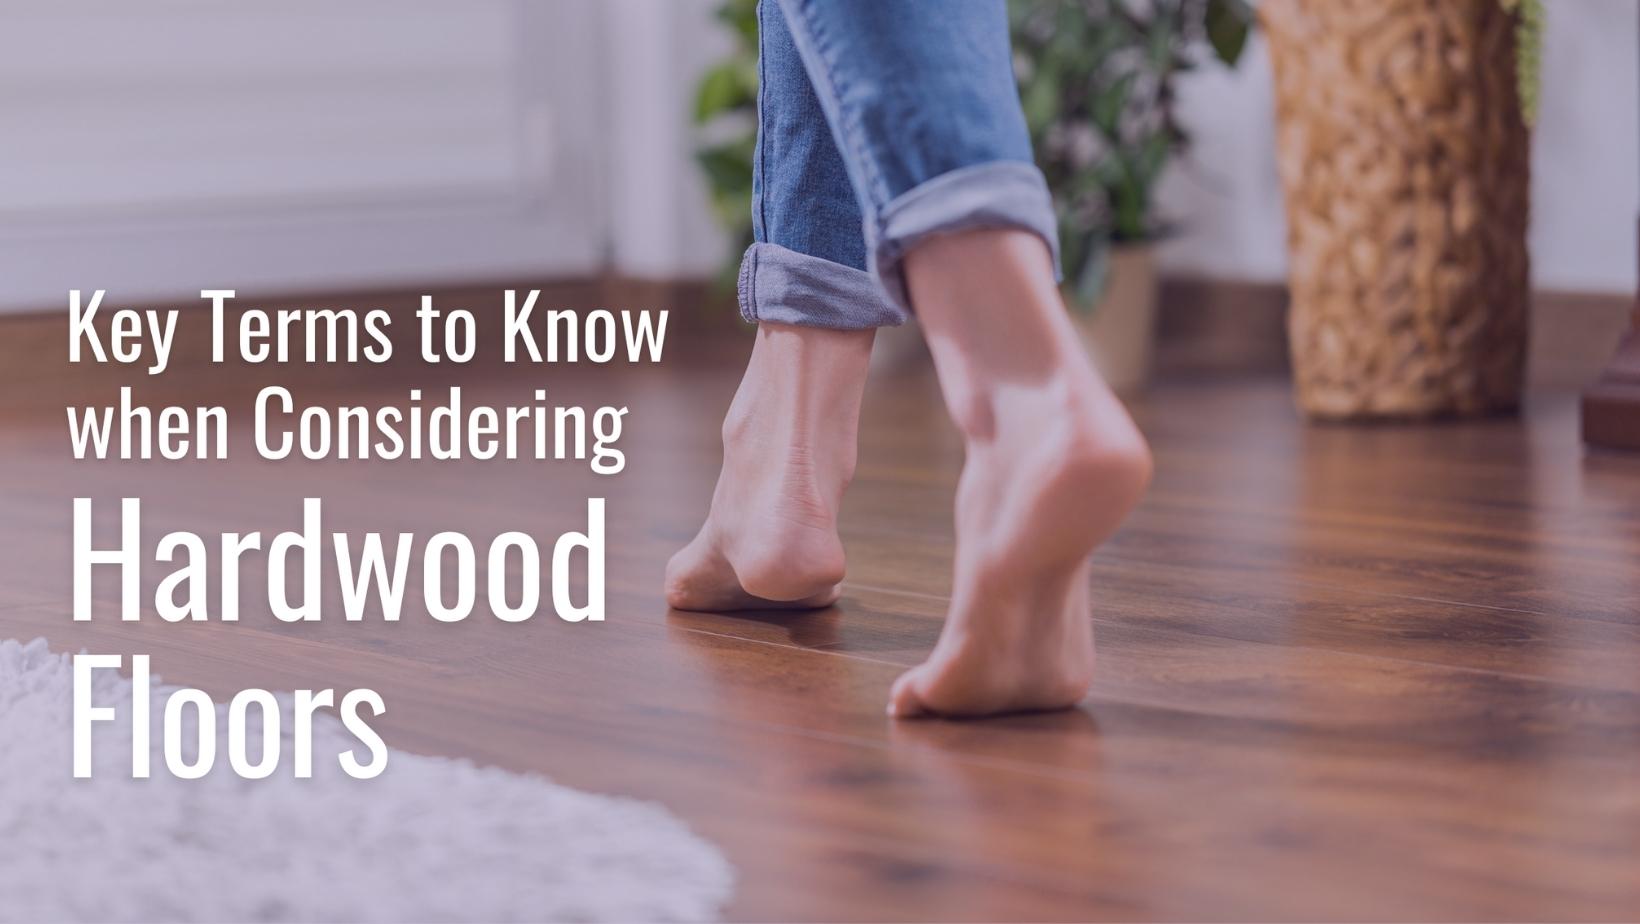 Key Terms to Know when Considering Hardwood Floors